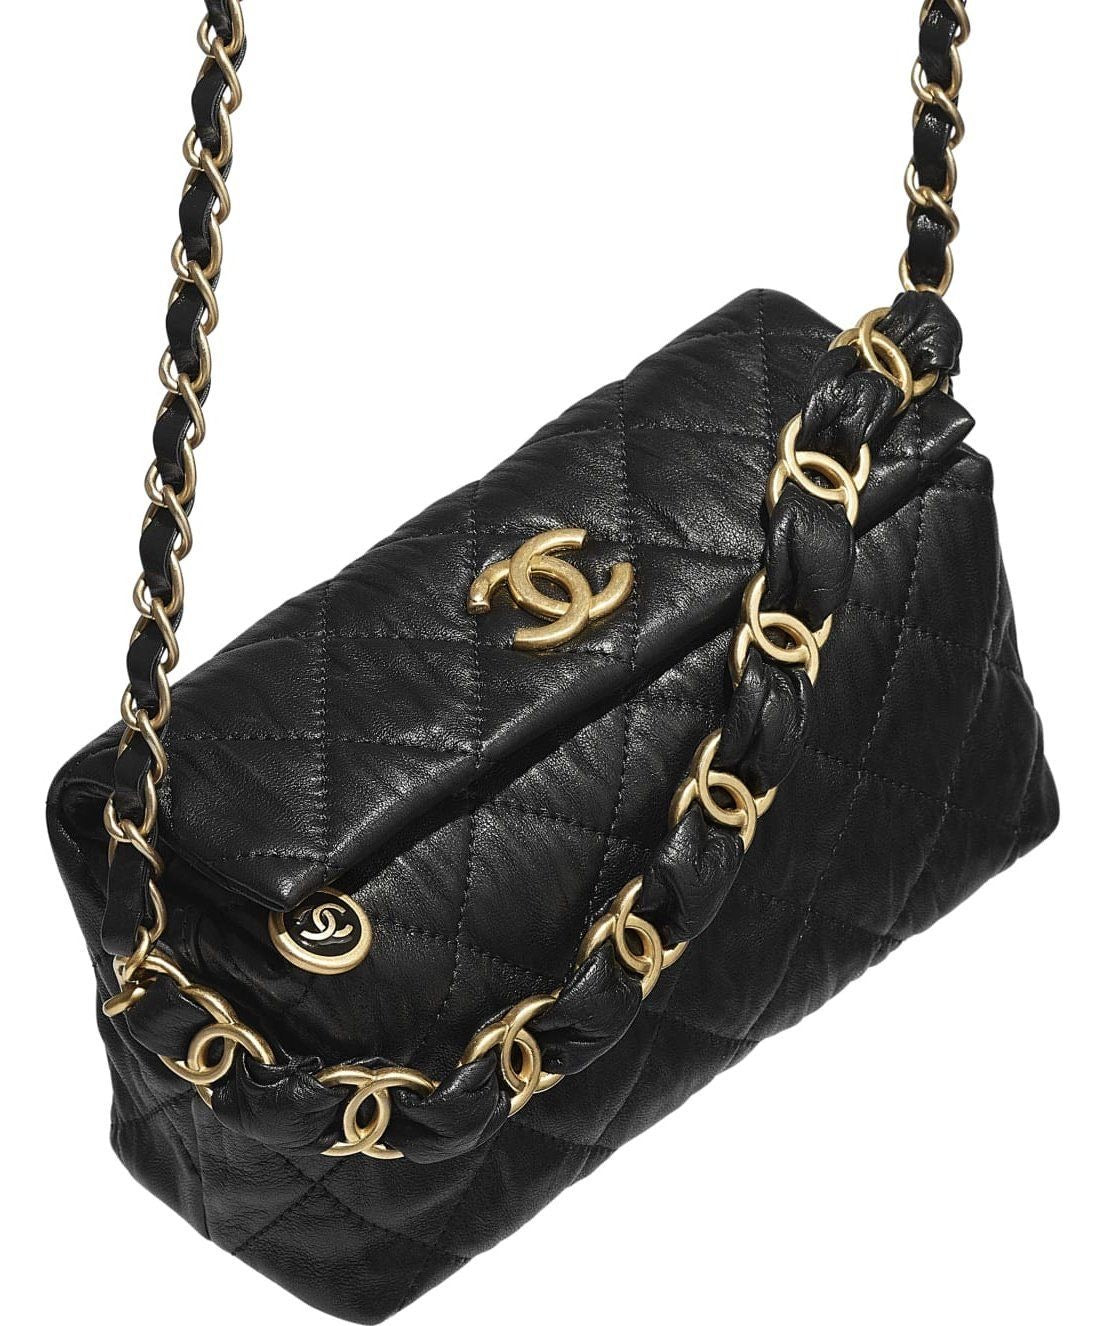 CHANEL Lambskin Quilted Small Hobo Bag Black 1264383